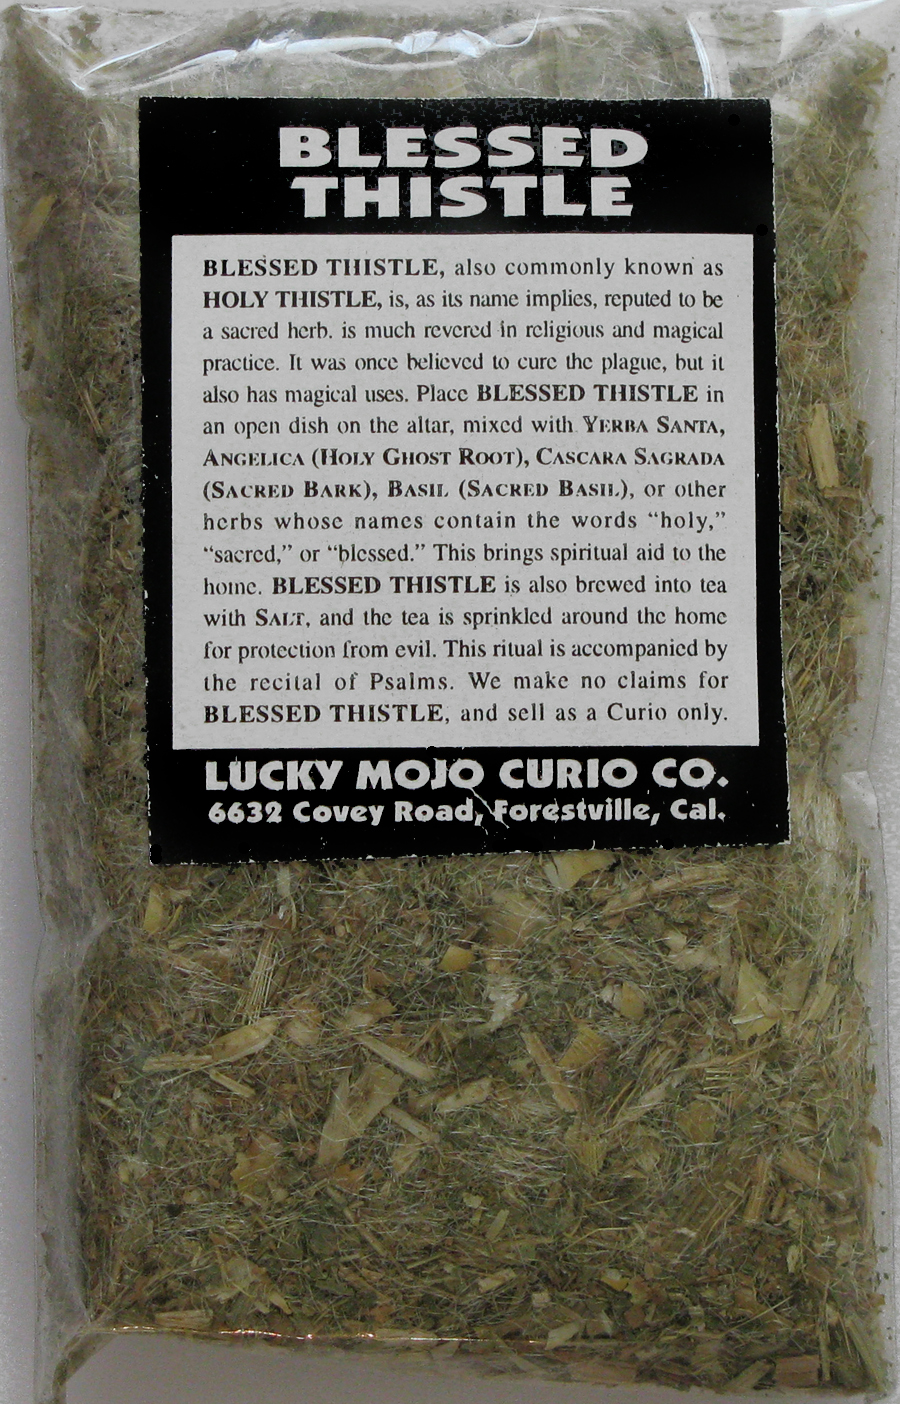 http://www.herb-magic.com/blessed-thistle-pack-large.jpg